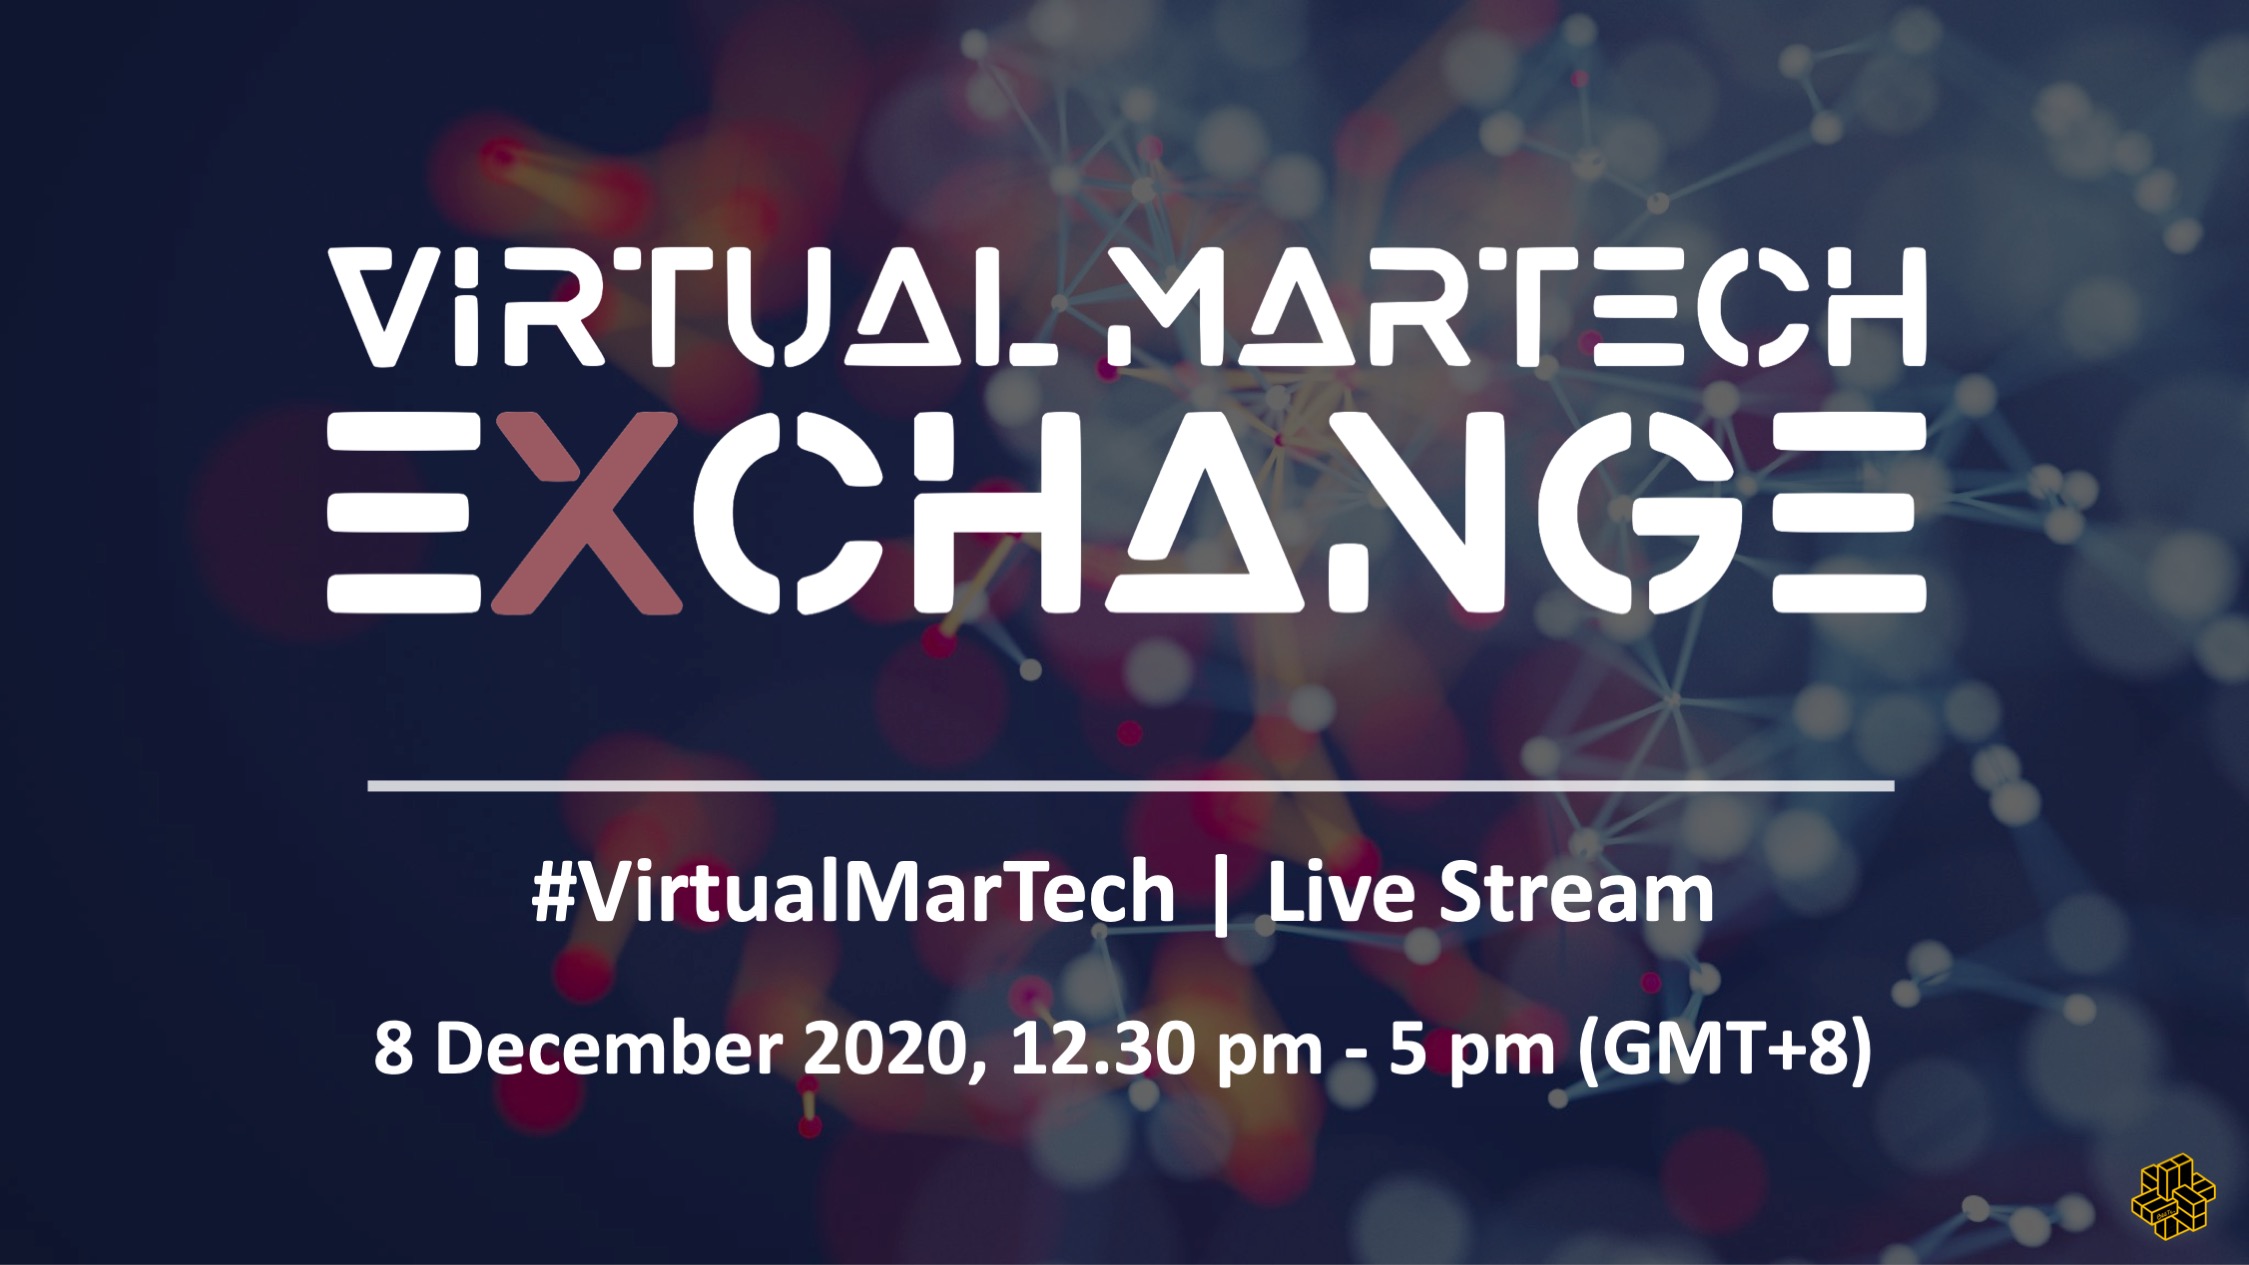 The Virtual MarTech Exchange Summit organized by BEETc